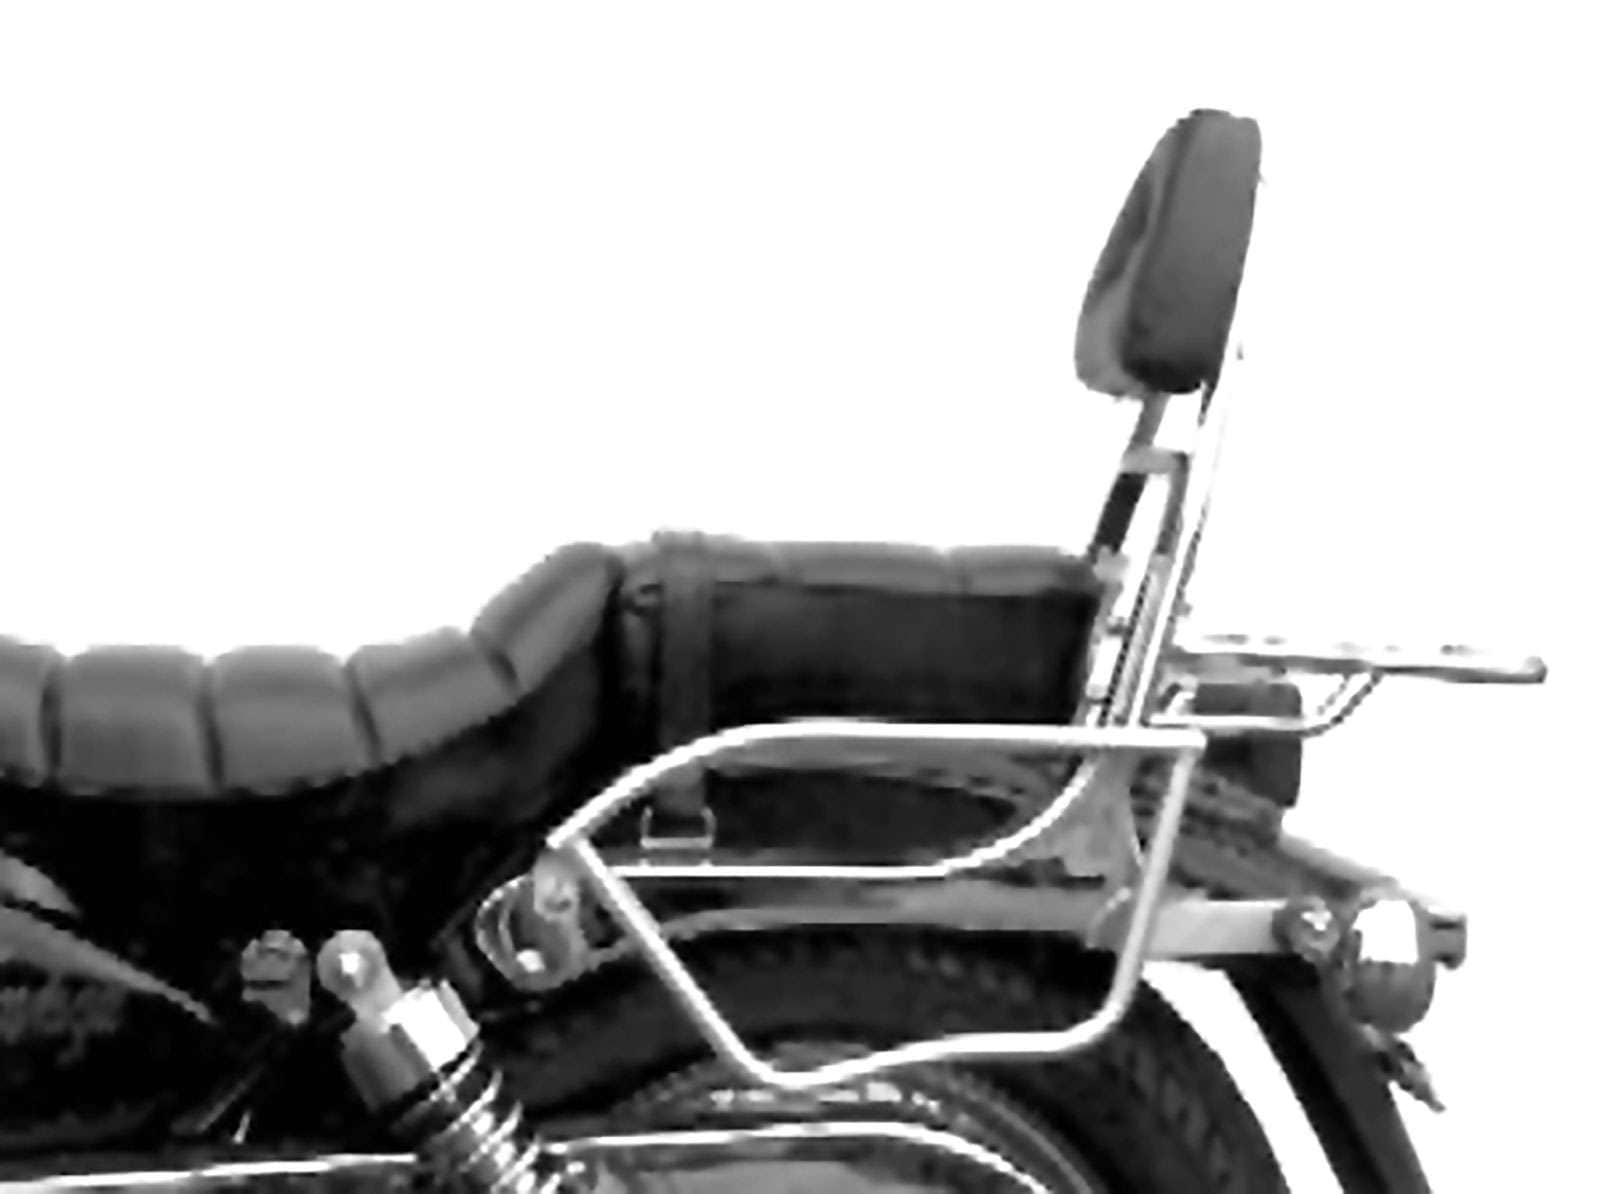 Sissybar without rearrack for Suzuki LS 650 (1986-1996)